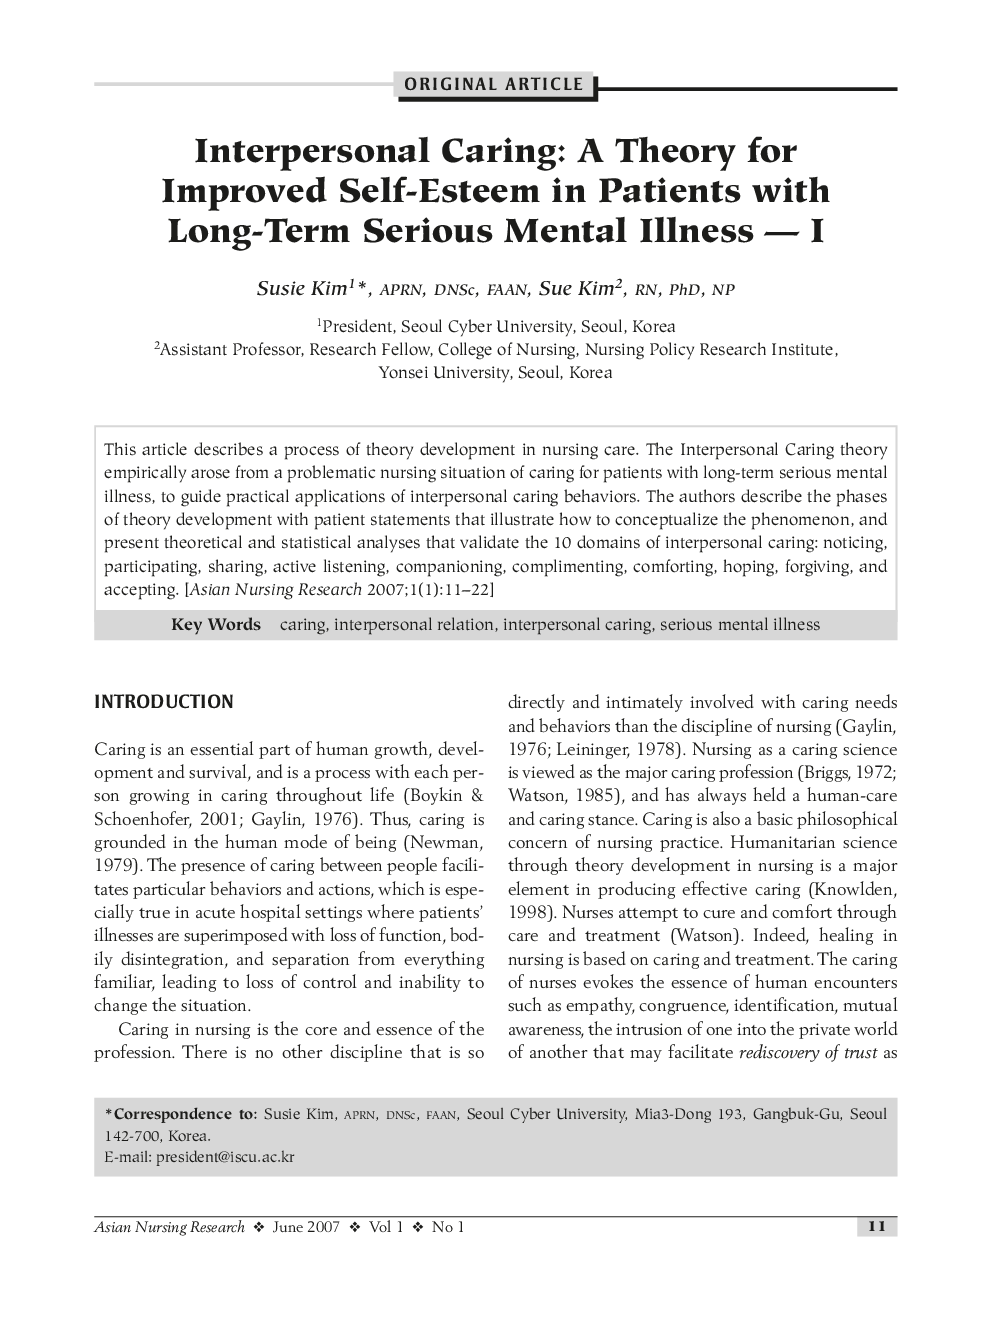 Interpersonal Caring: A Theory for Improved Self-Esteem in Patients with Long-Term Serious Mental Illness – I